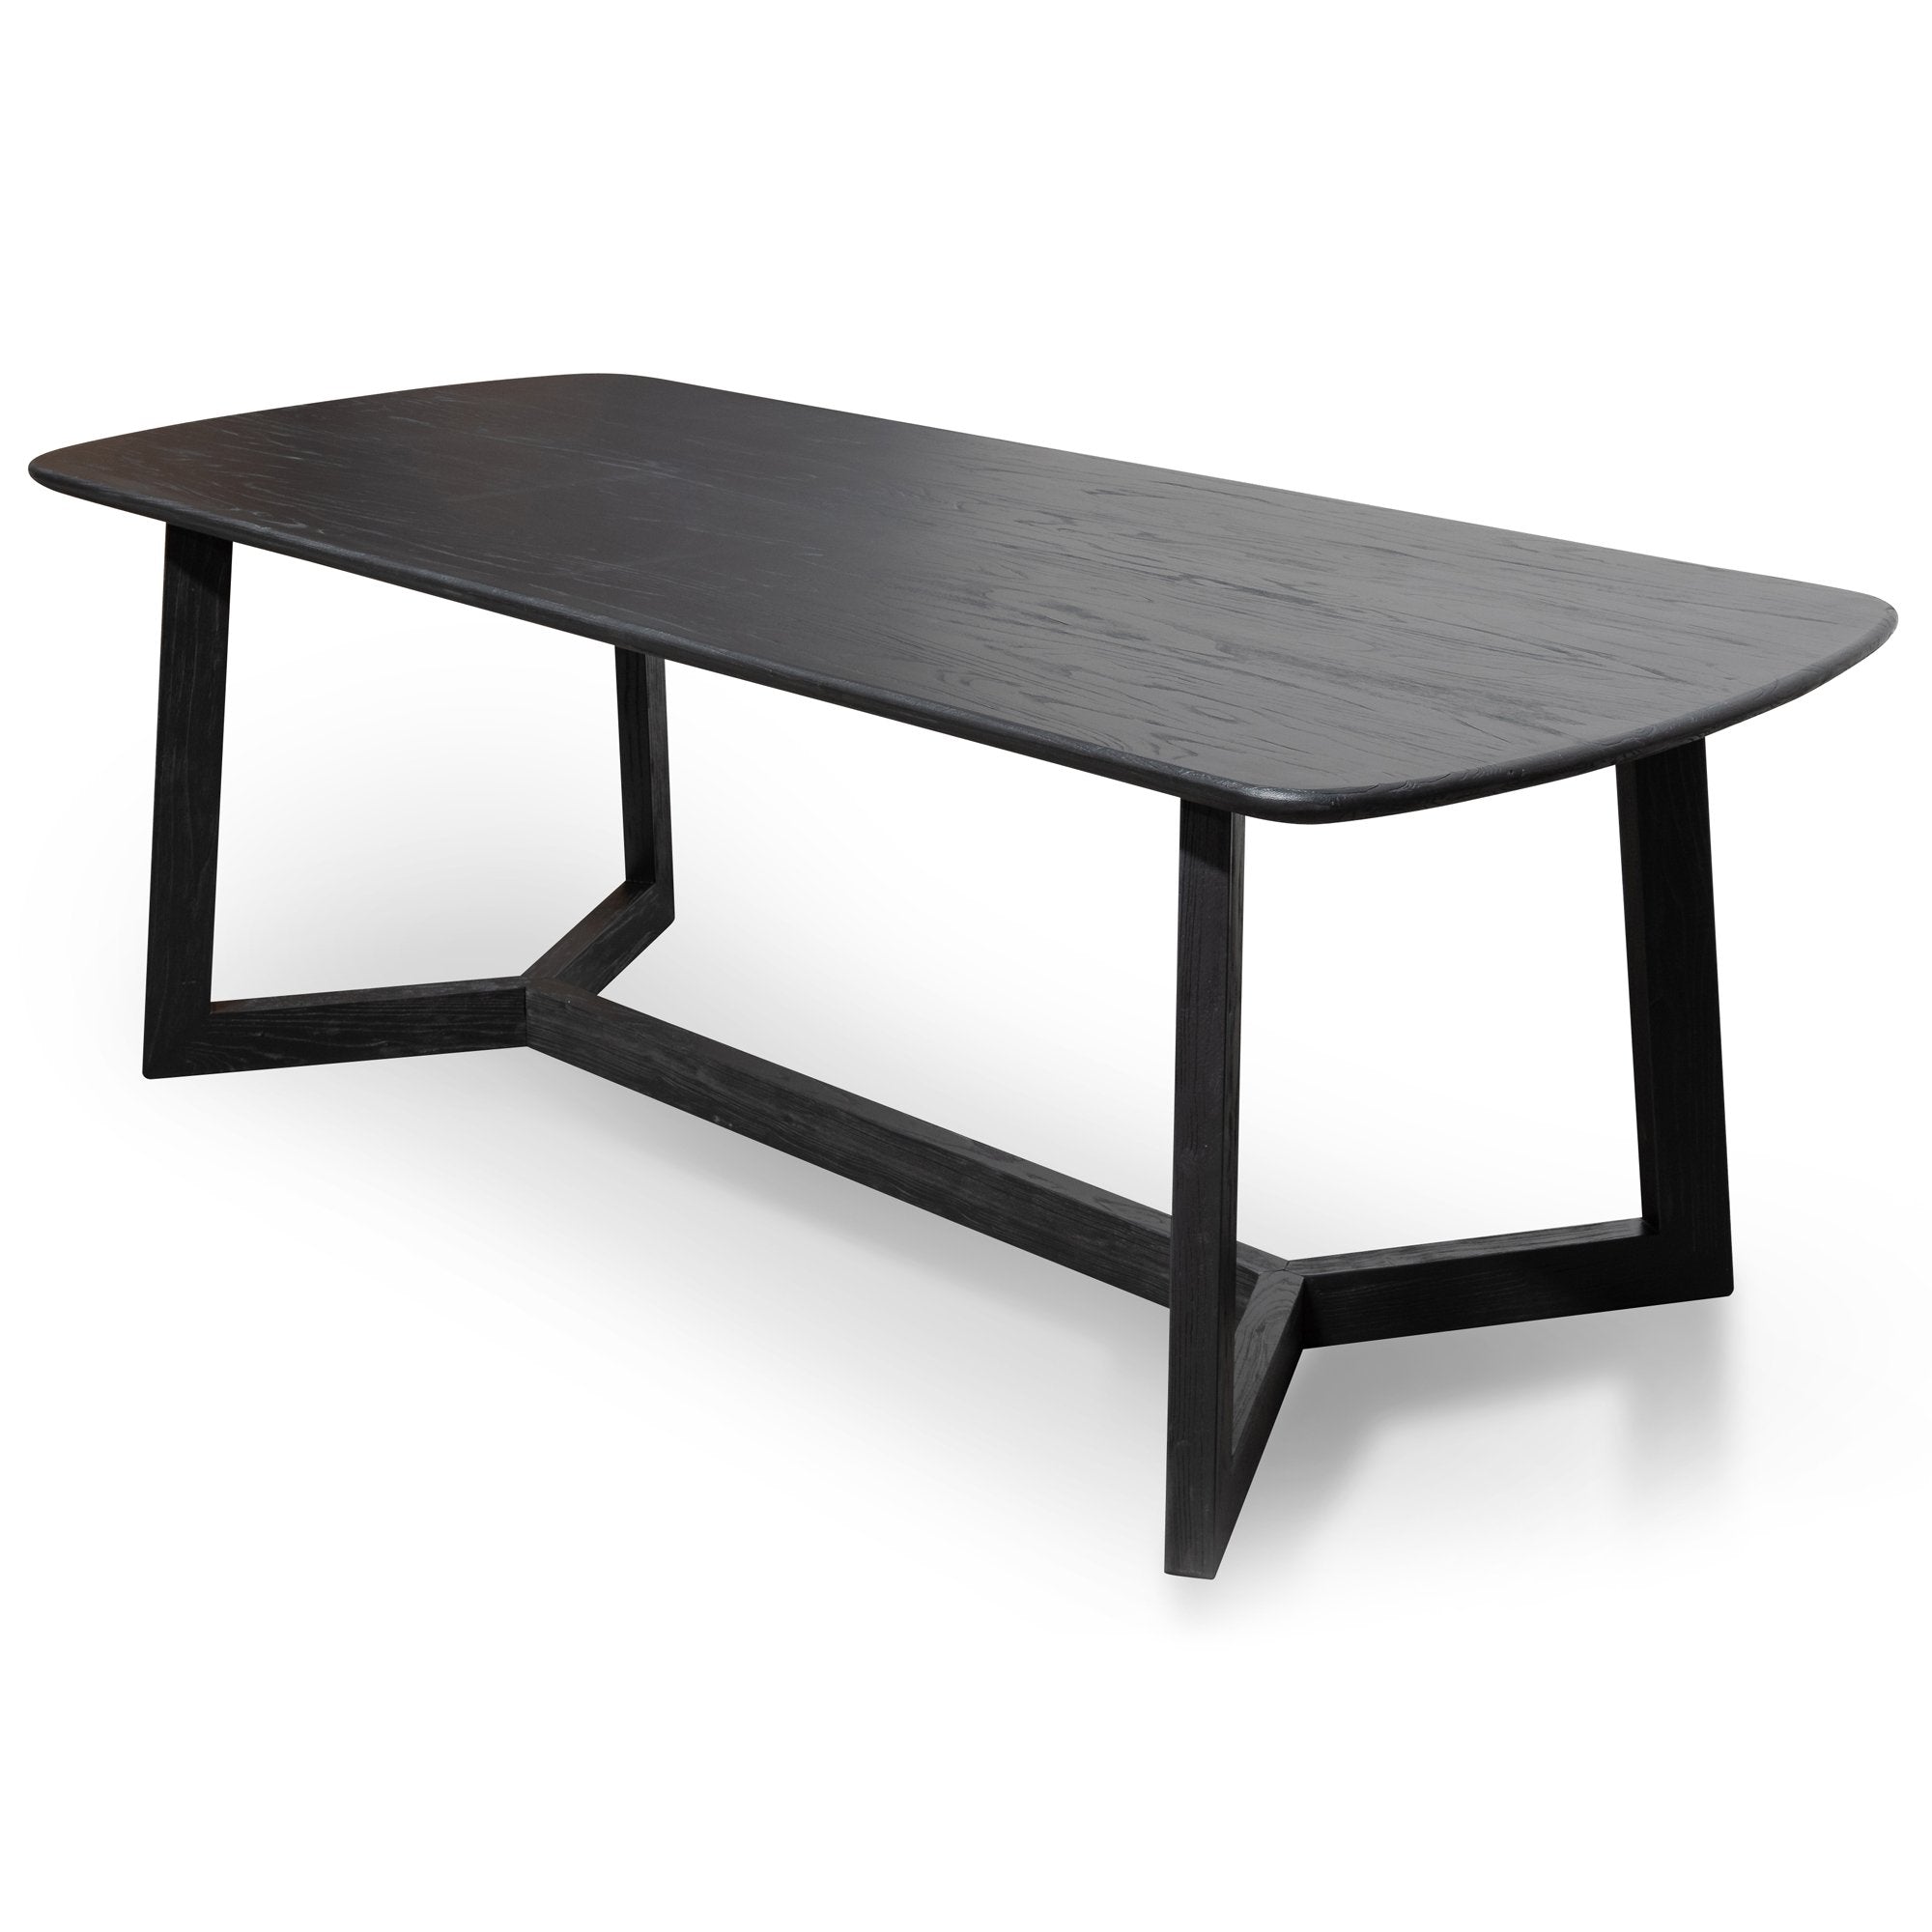 2.2m Wooden Dining Table - Black